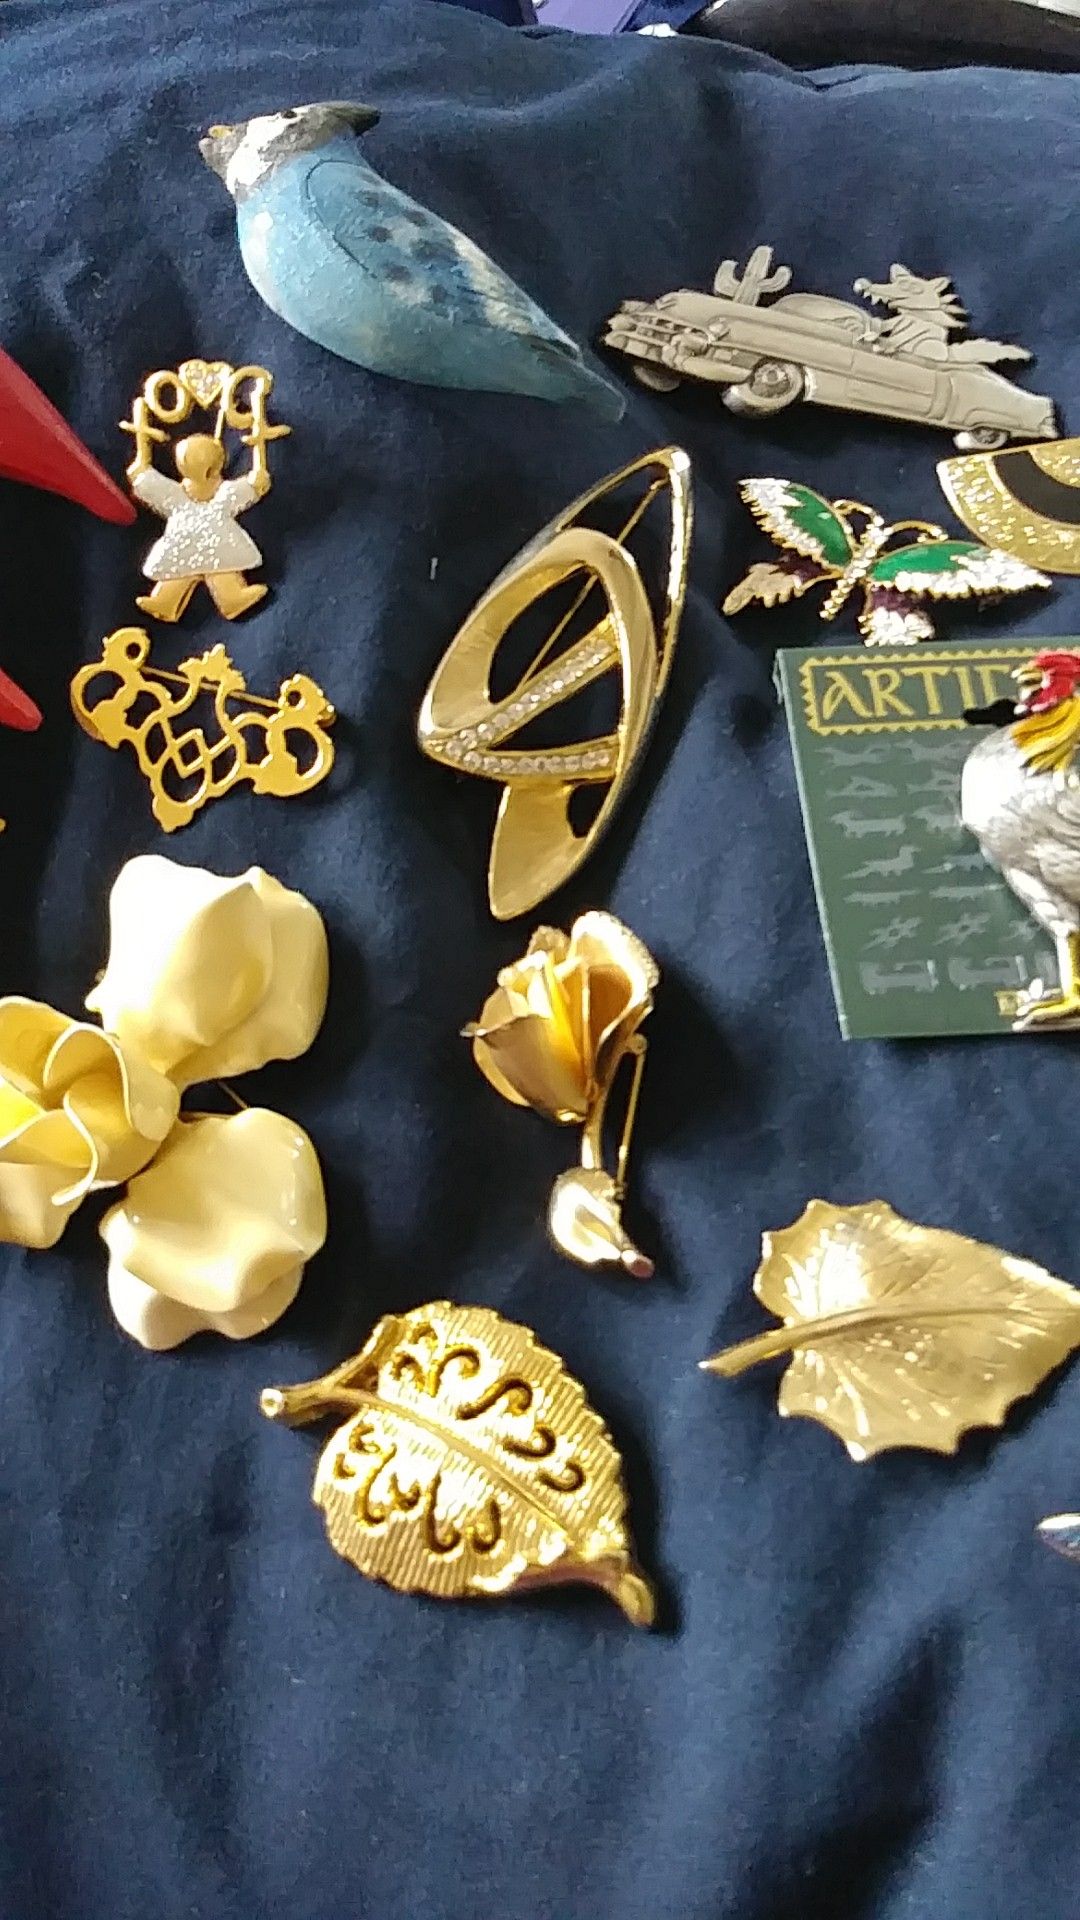 19 VINTAGE LAPEL PINS/BROOCHES